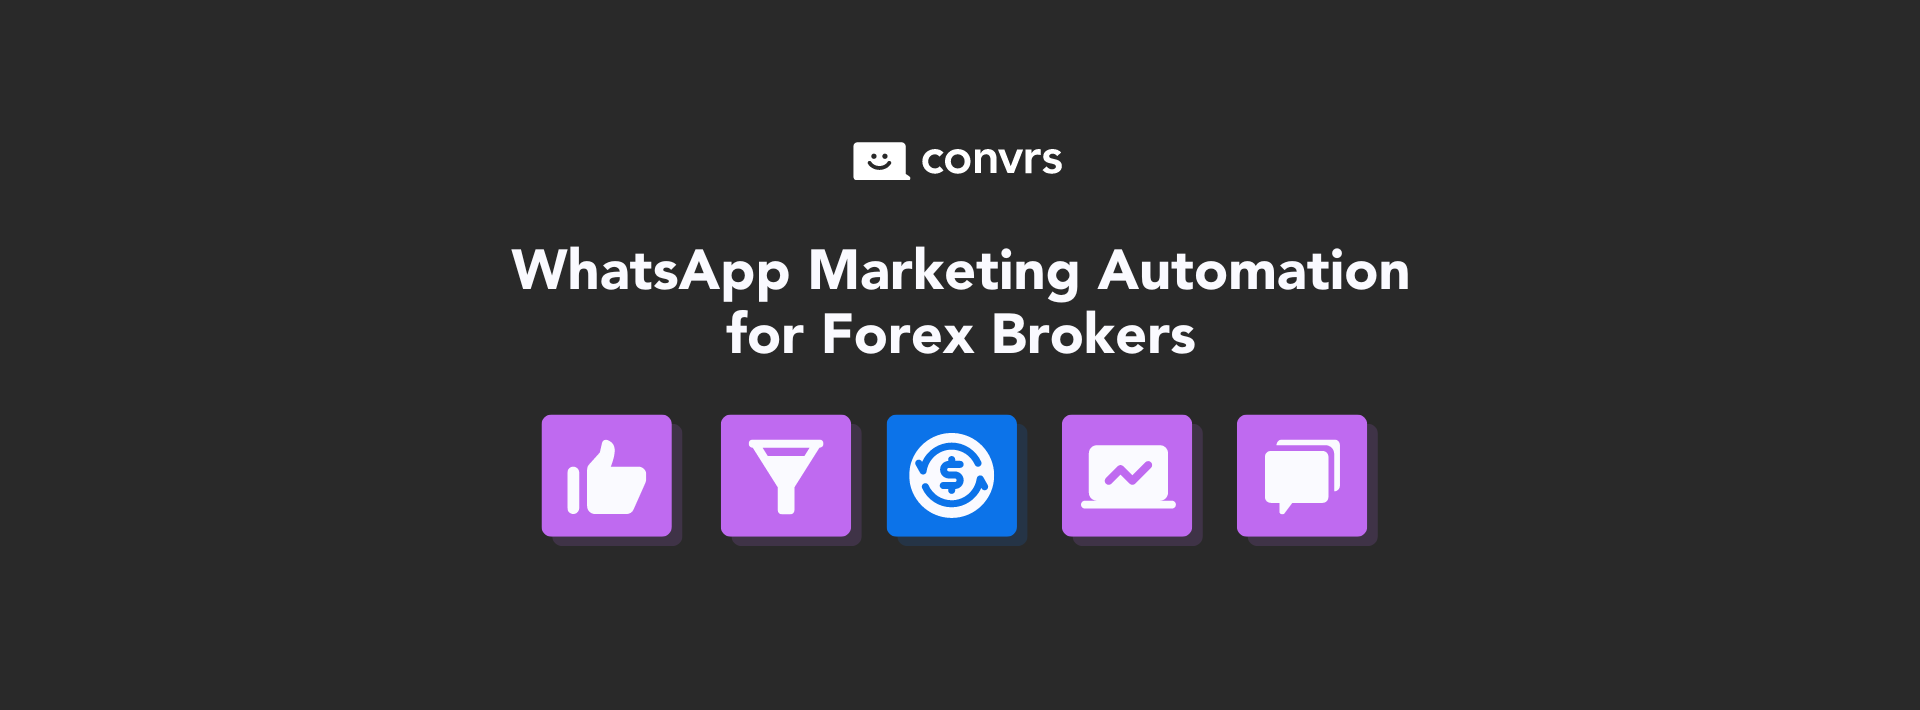 Image showing the benefits of Forex Brokers using WhatsApp Automation for Marketing such as increased engagement, improved conversion rates, reach and scalability, and personalized customer experiences